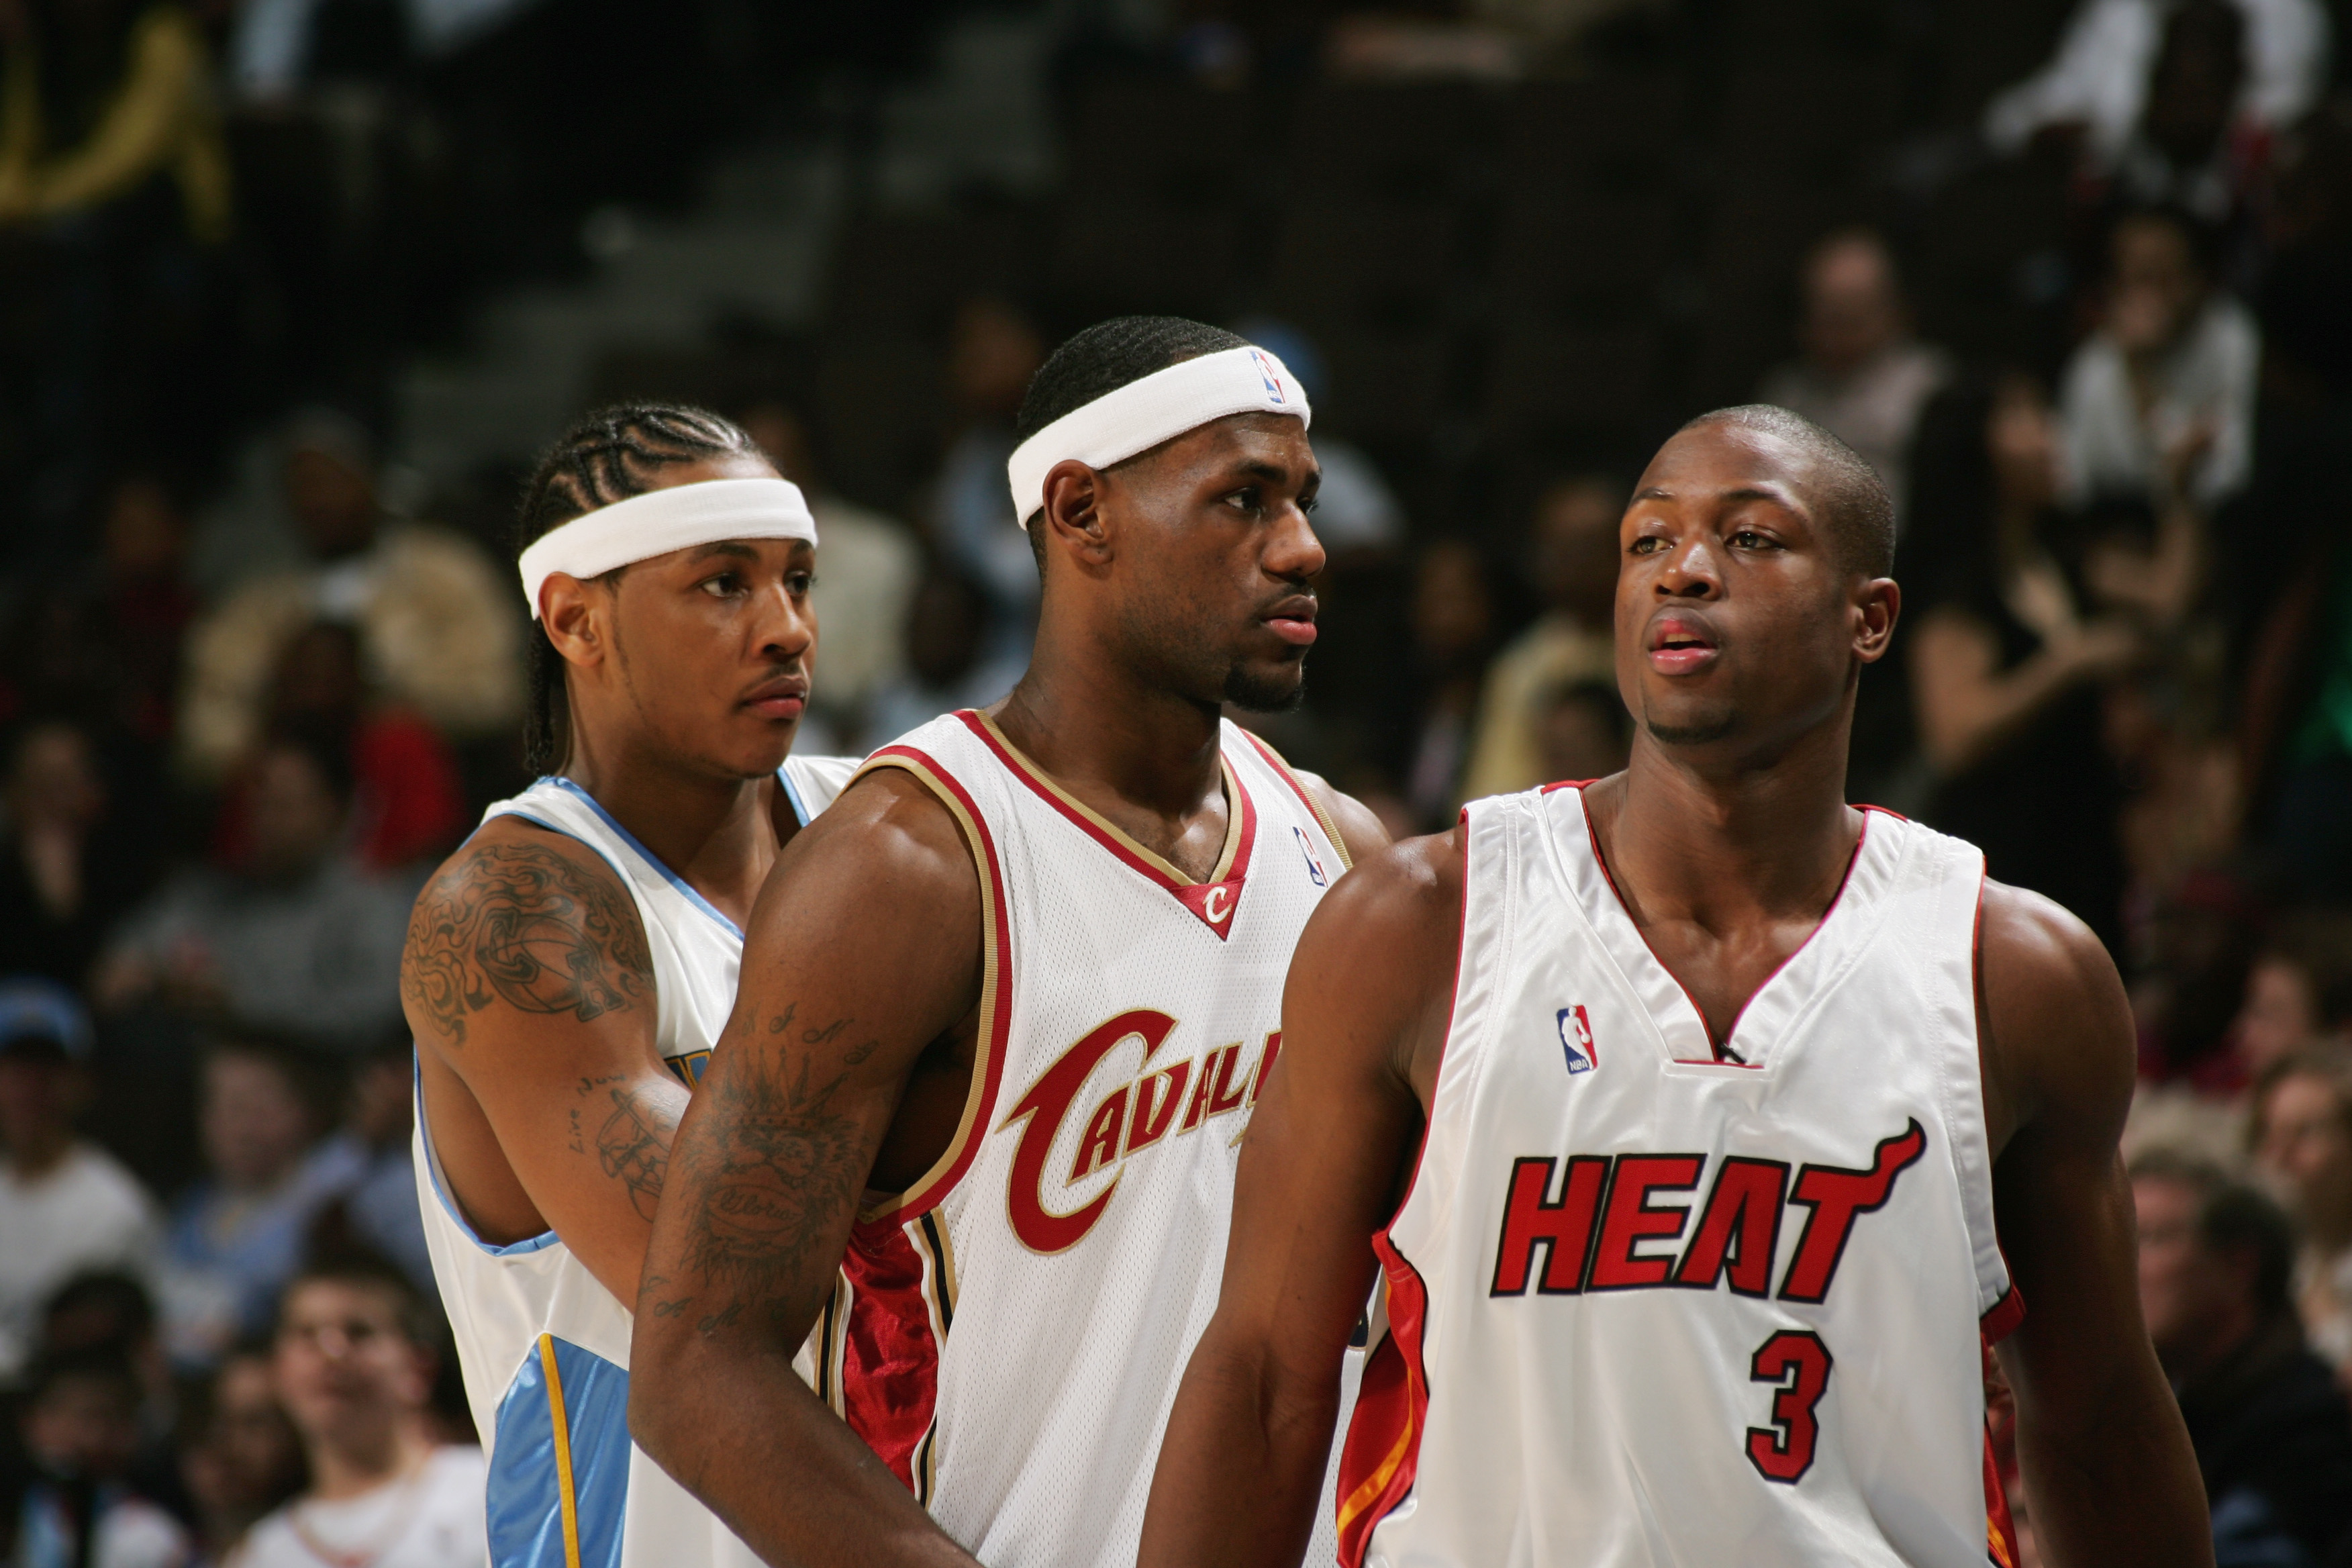 Three basketball players in jerseys, two from the Cavaliers and one from the Heat, focused during a game